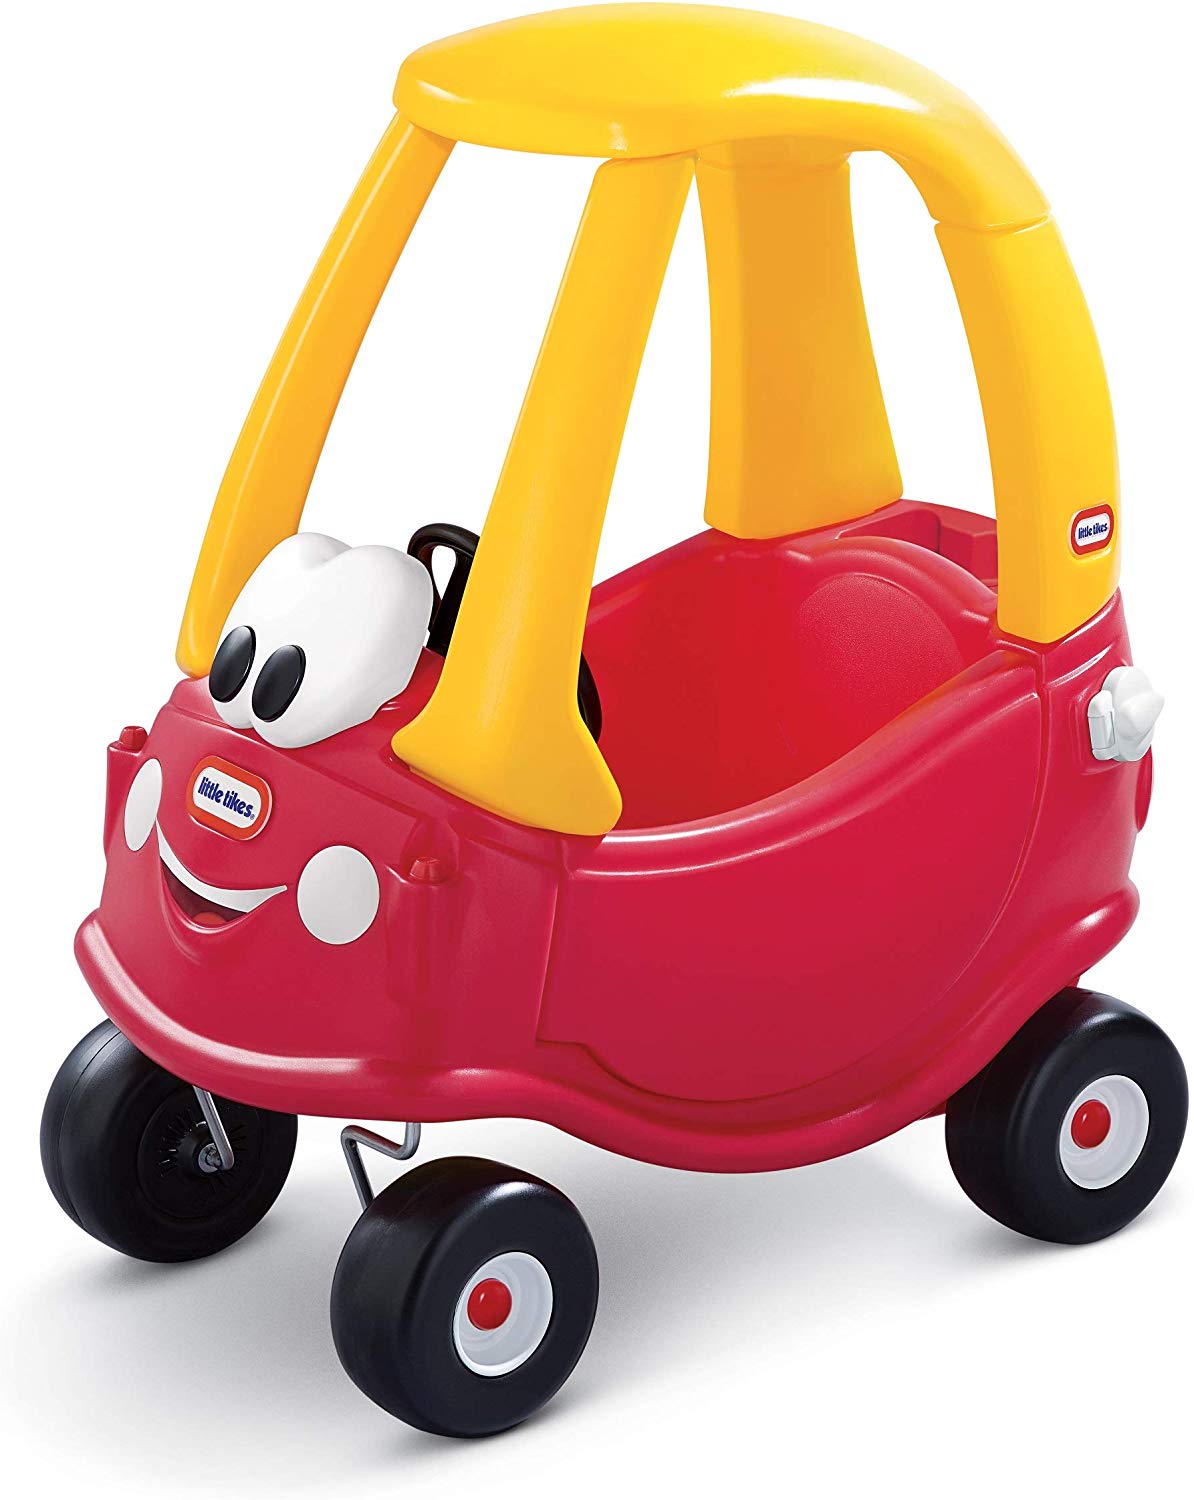 Wonen kleding gemakkelijk The Adult Version Of The Little Tikes Toy Car Is Real — And Fast!